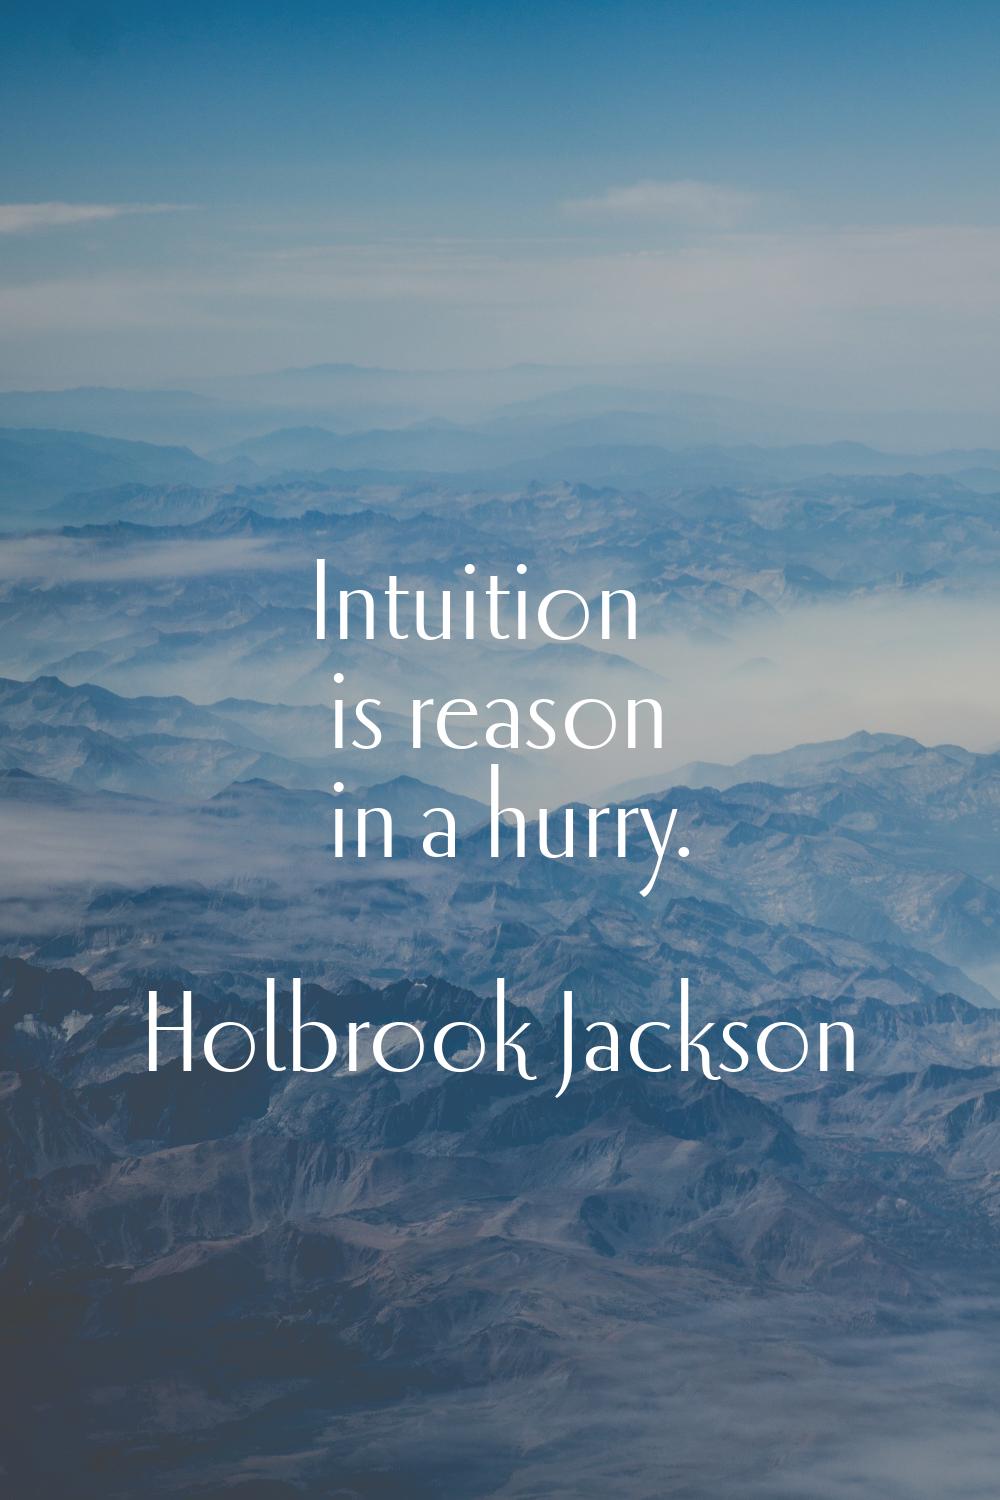 Intuition is reason in a hurry.